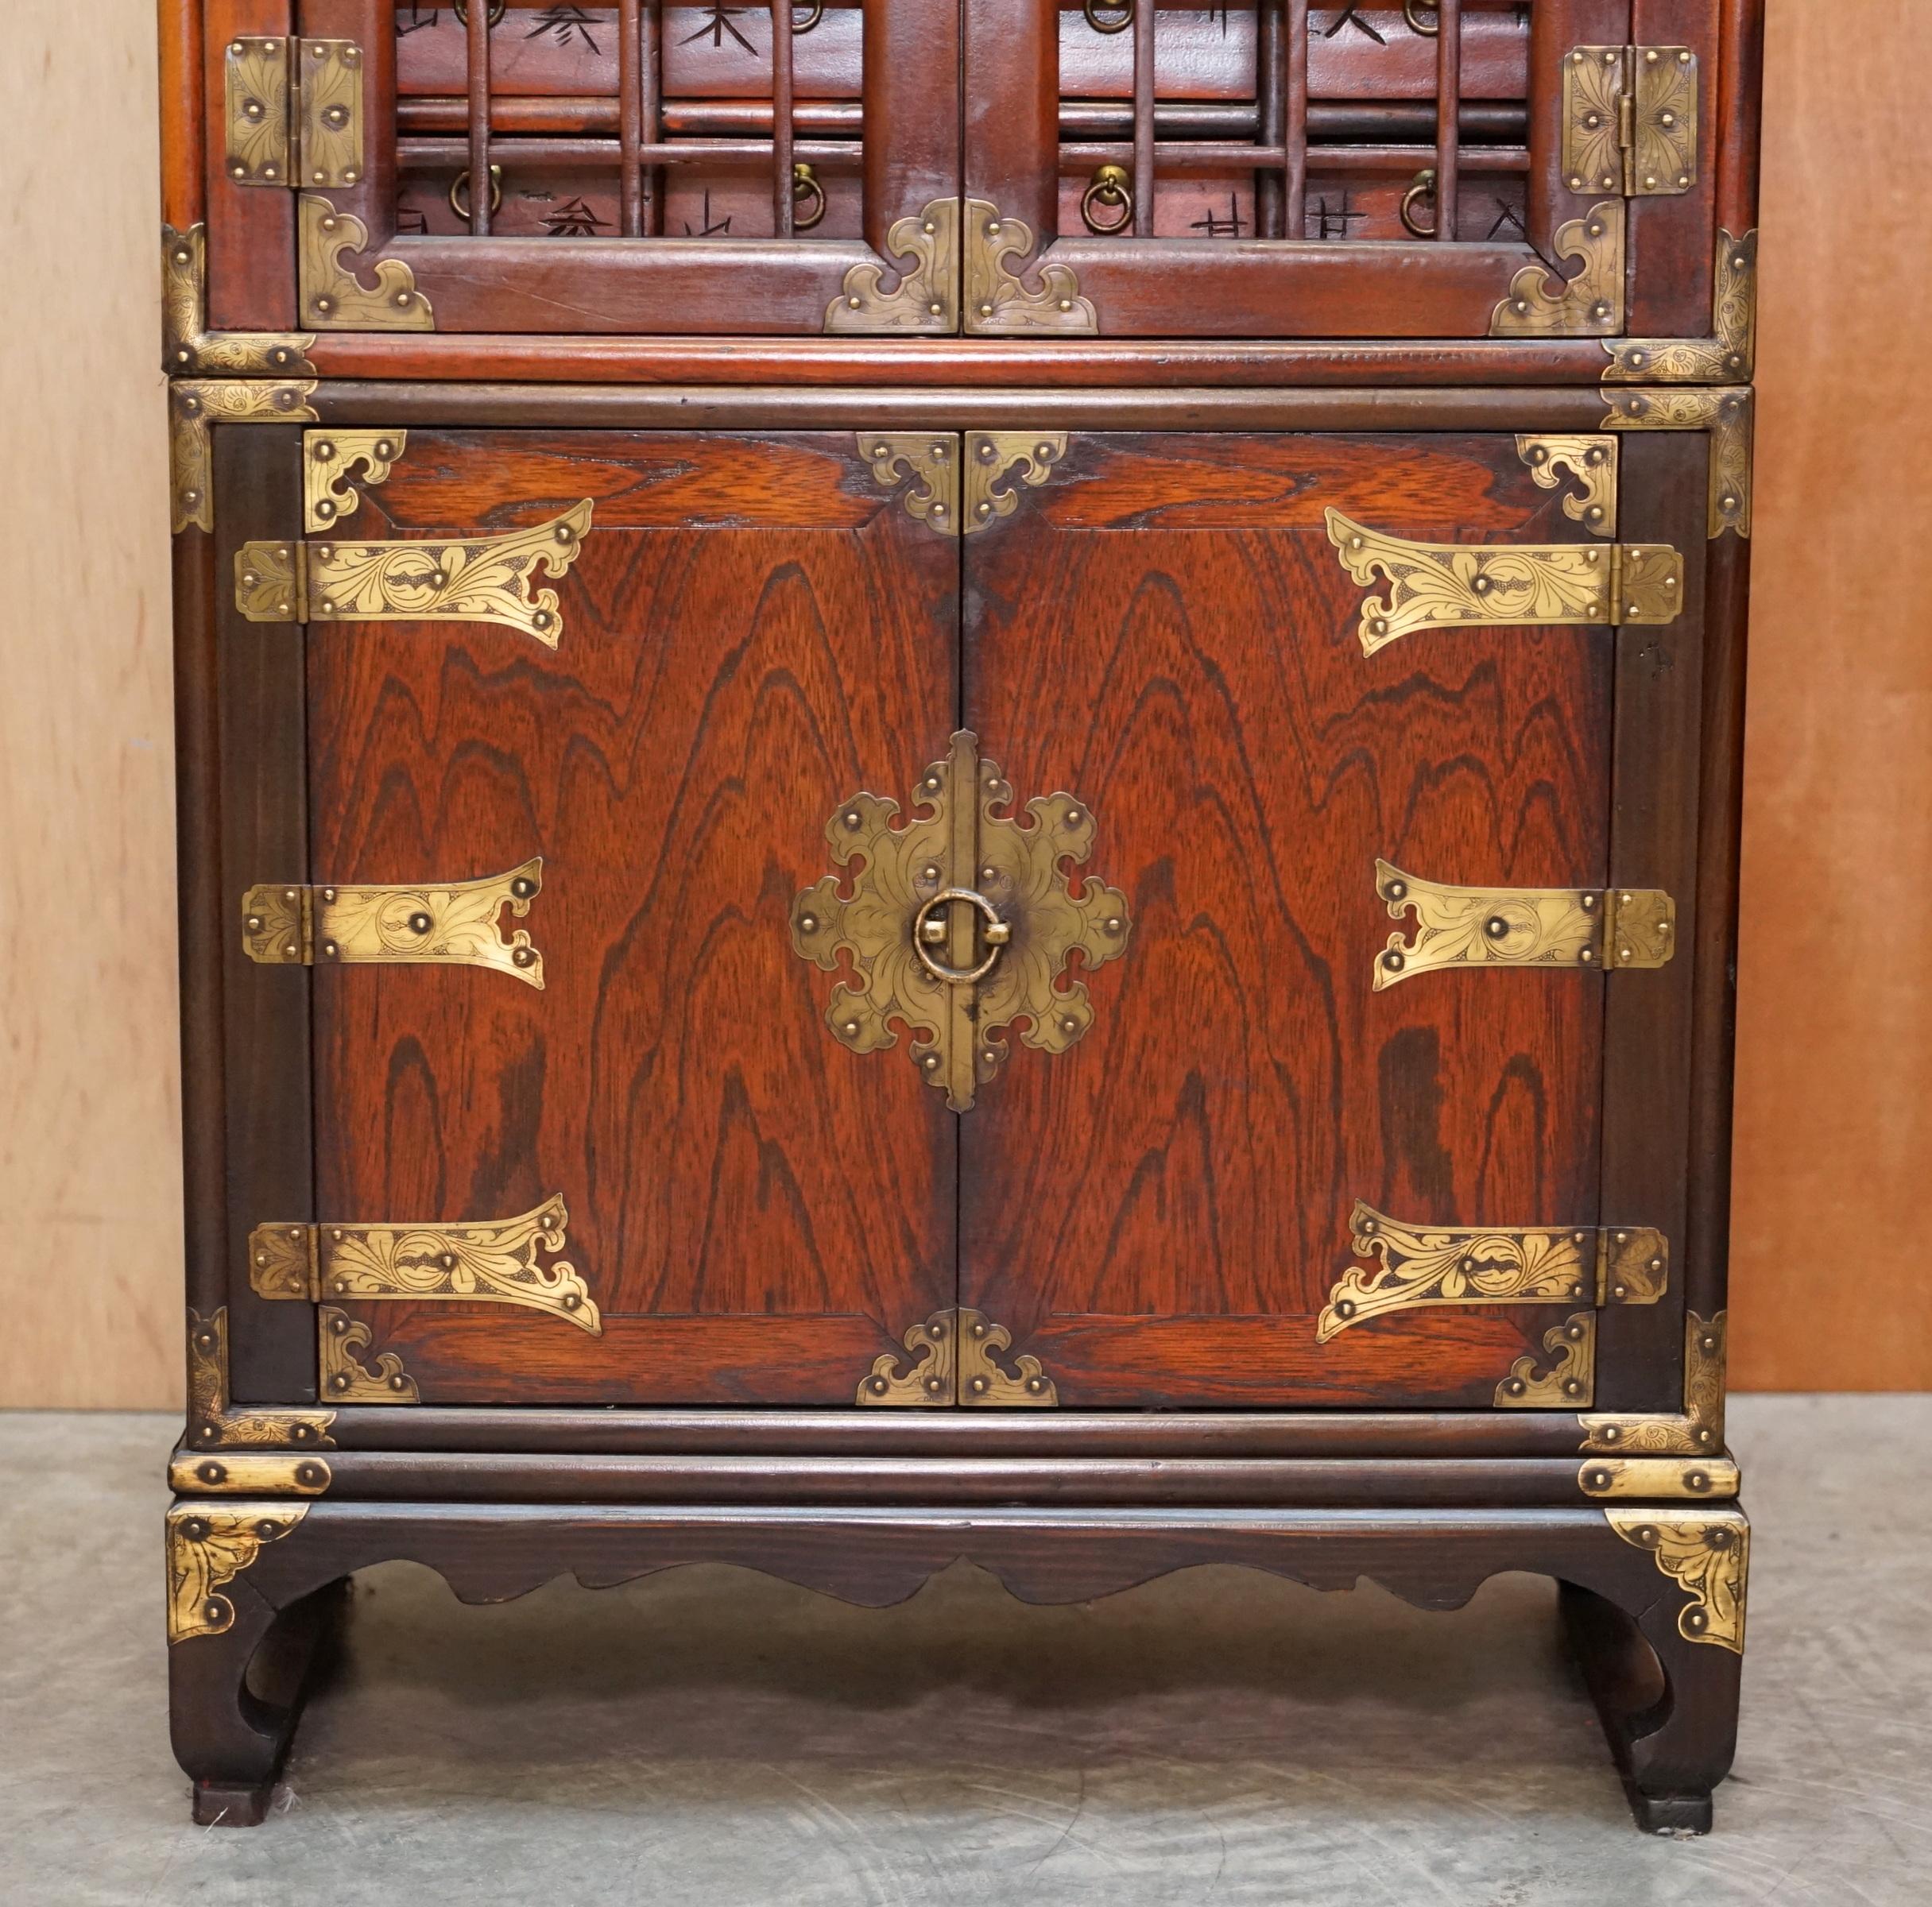 Chinese Export Decorative Oriental Sideboard Cabinet Oversized Metal Fittings & Small Drawers